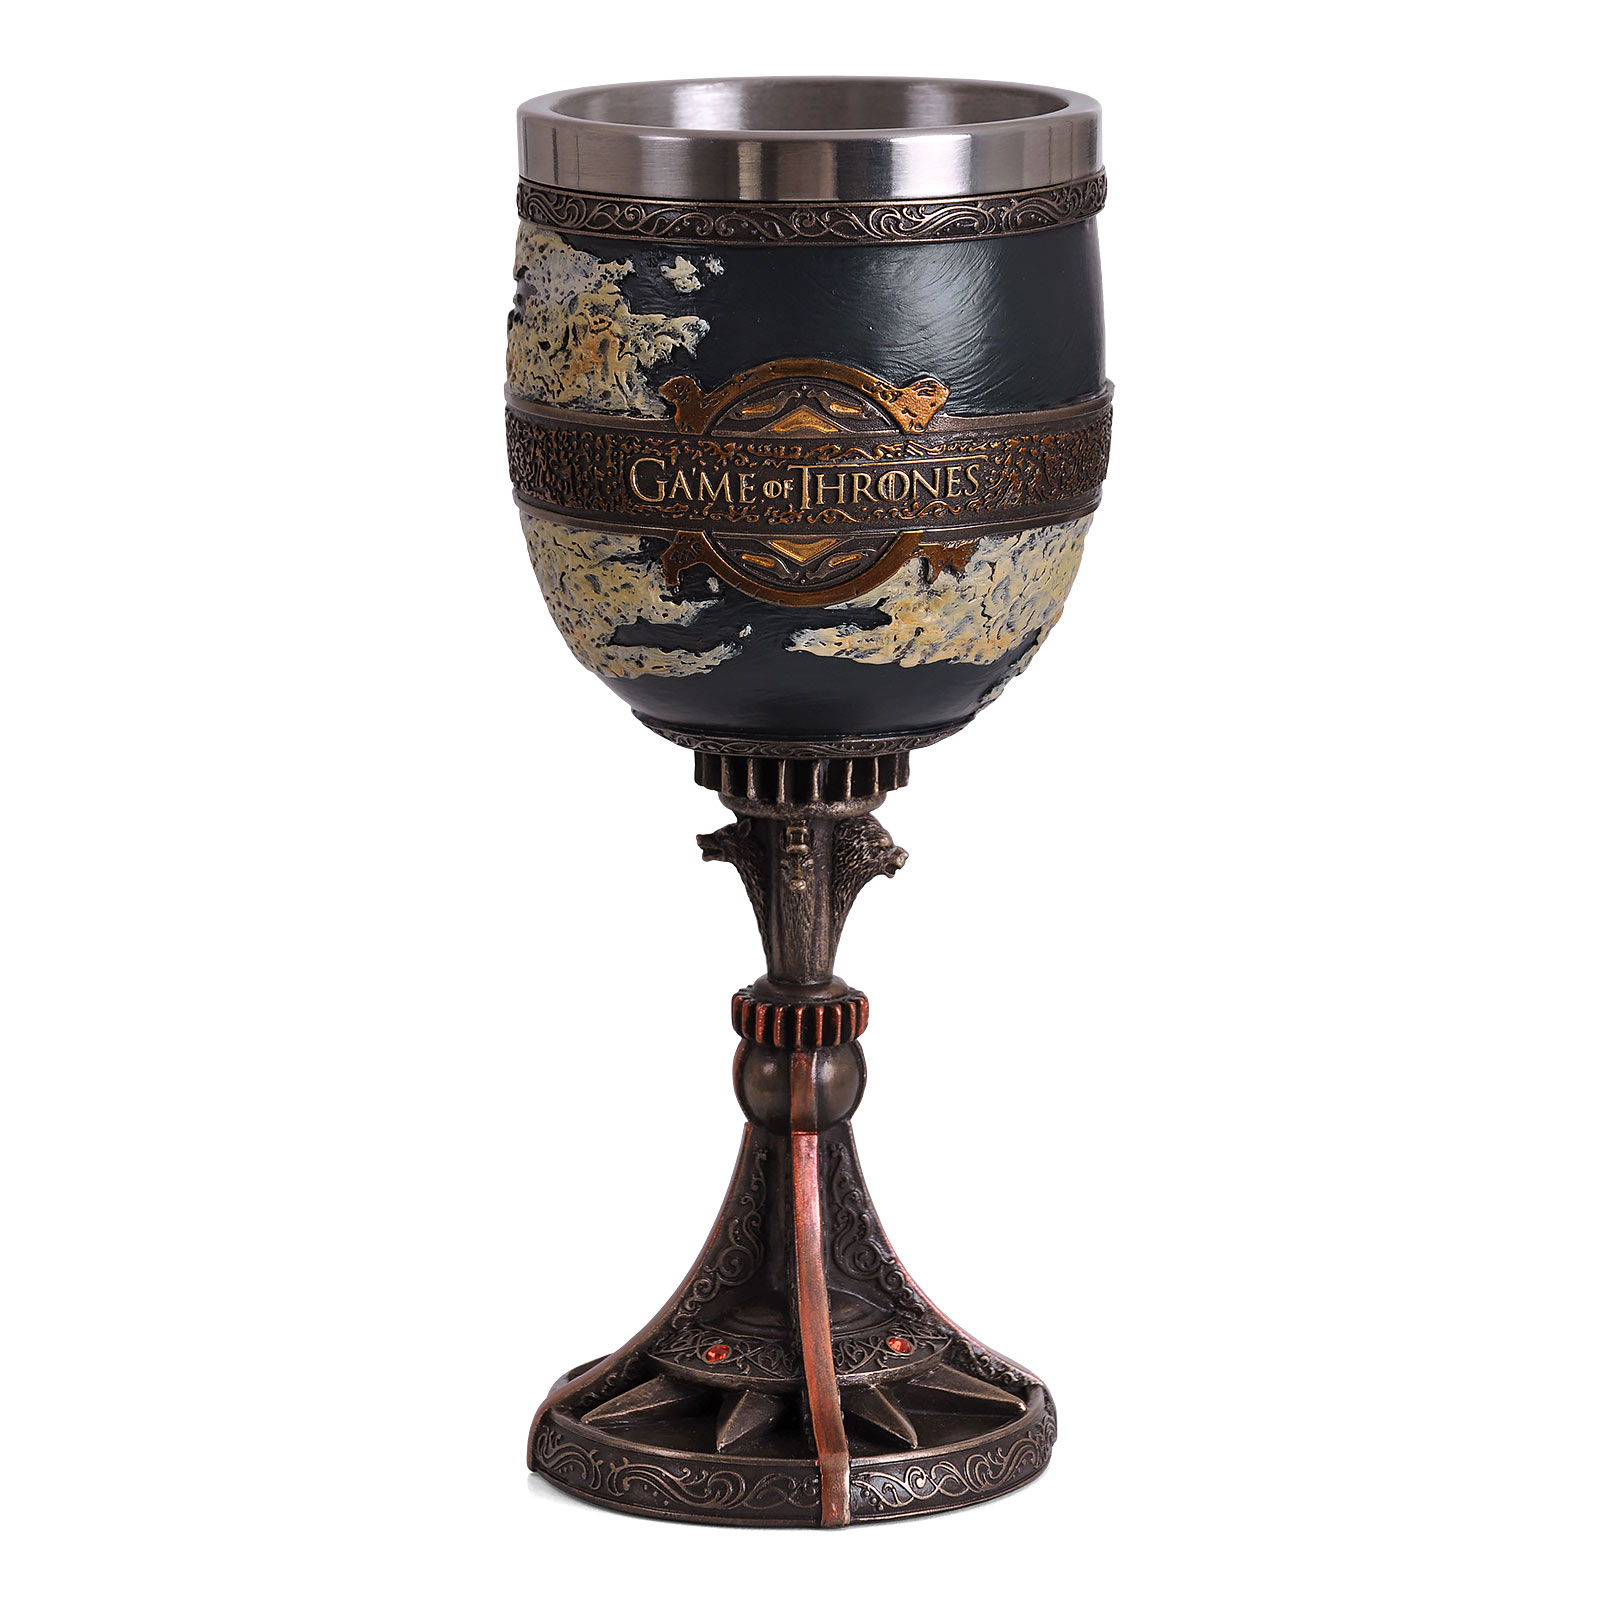 Game of Thrones - Westeros and Essos Chalice deluxe